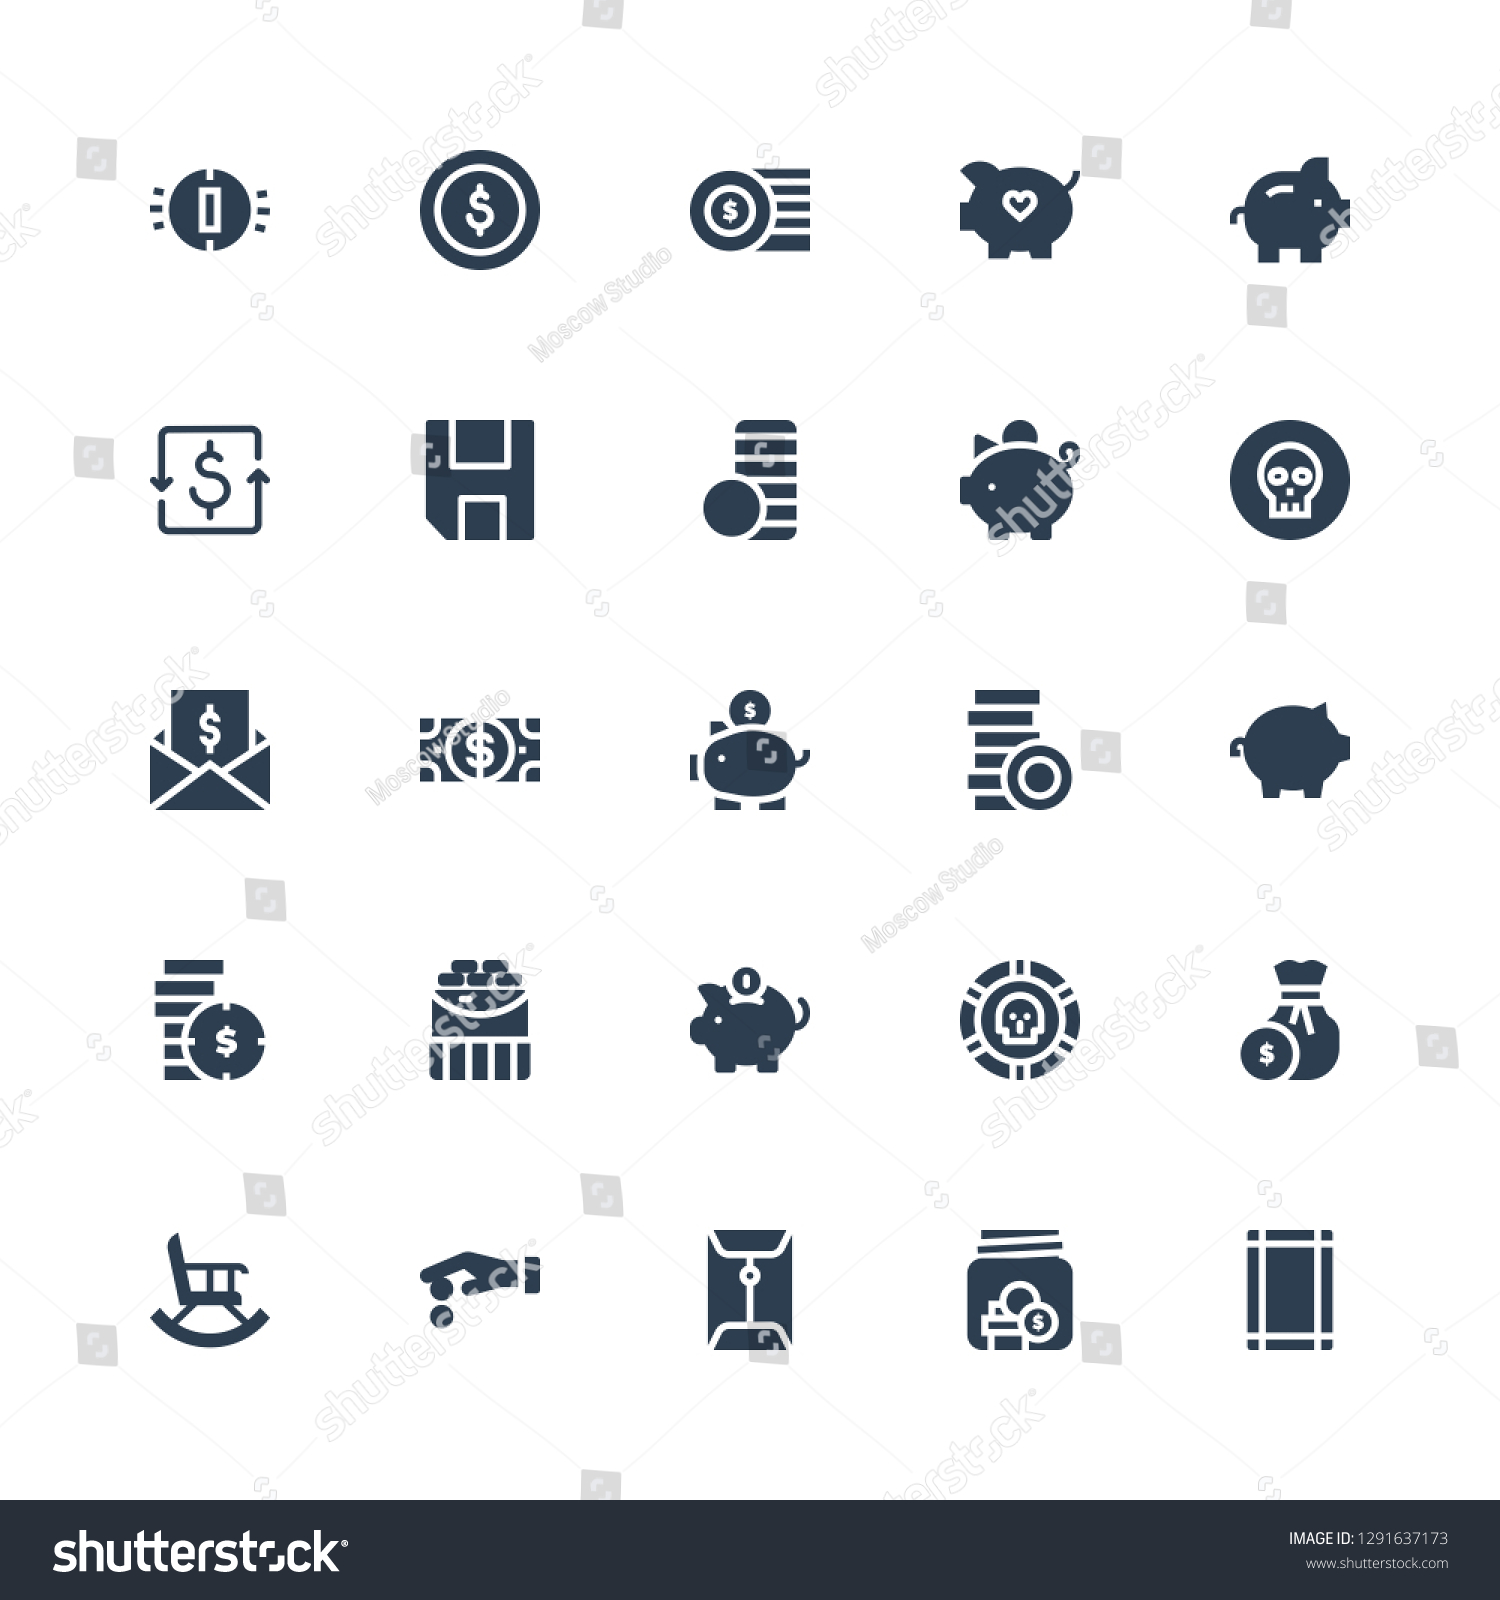 income icon set. Collection of 25 filled income icons included Margin, Savings, Coin, Coins, Retirement, Piggy bank, Dollar, Taxes, Coin stack, Save, Dollar coins #1291637173